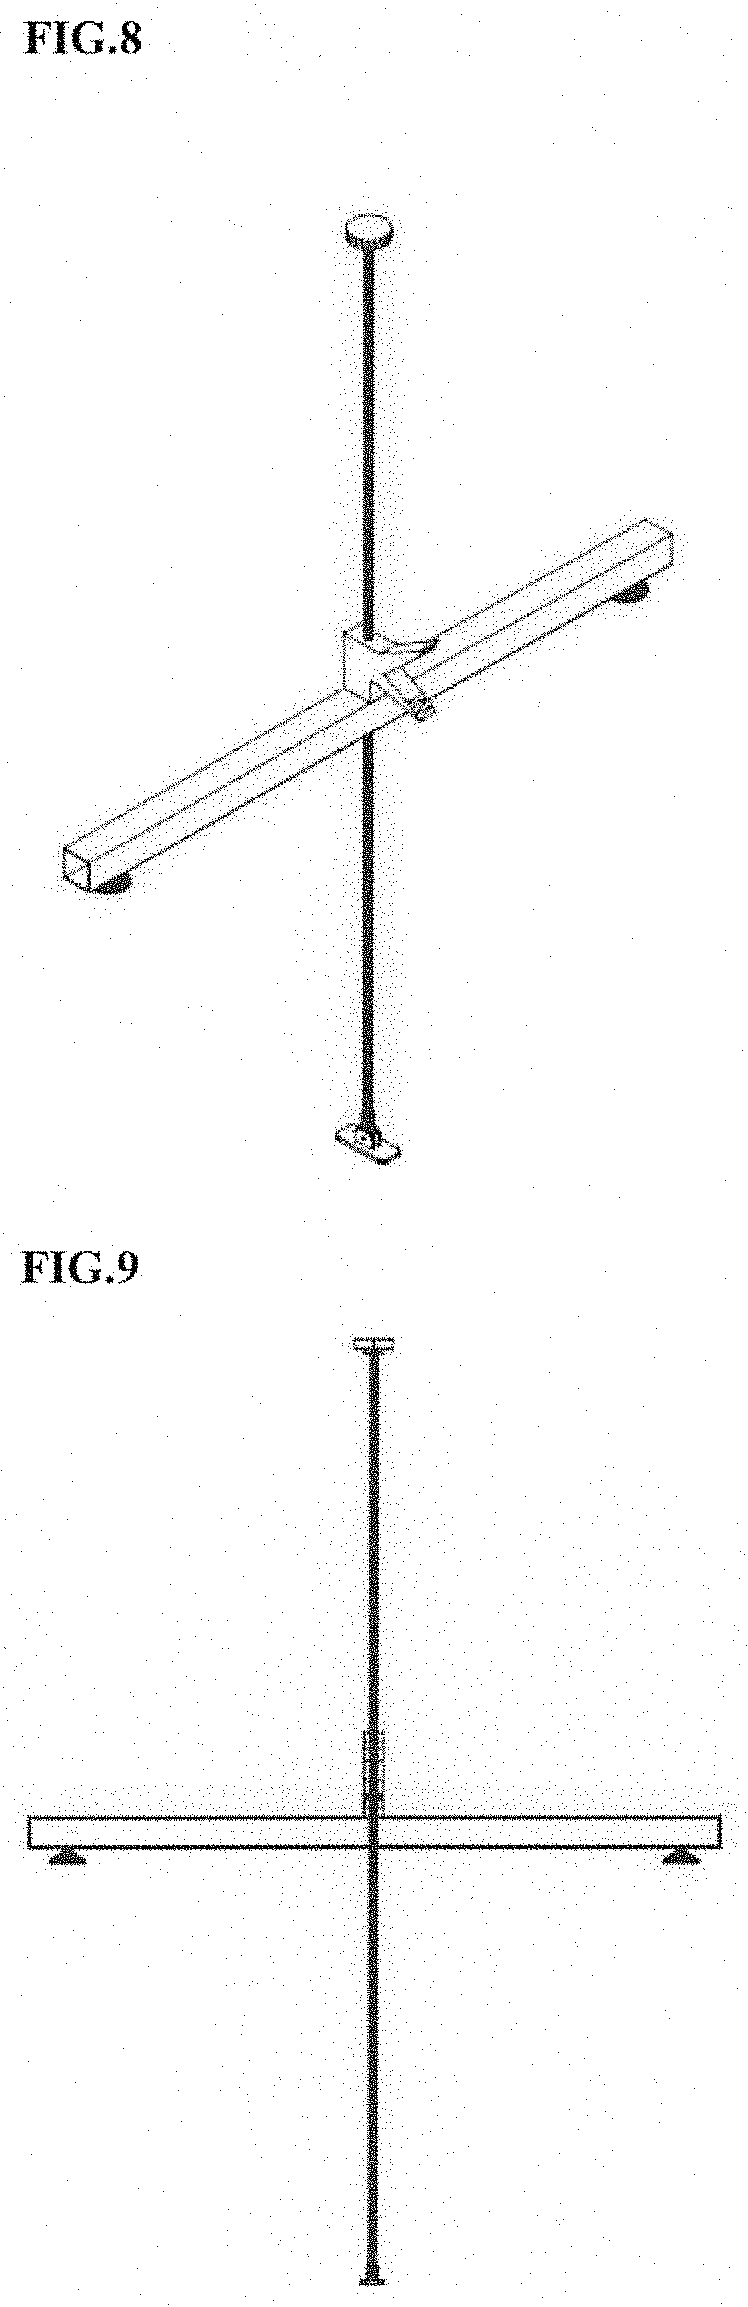 Universal single person undermount fixture installation device and method of using same